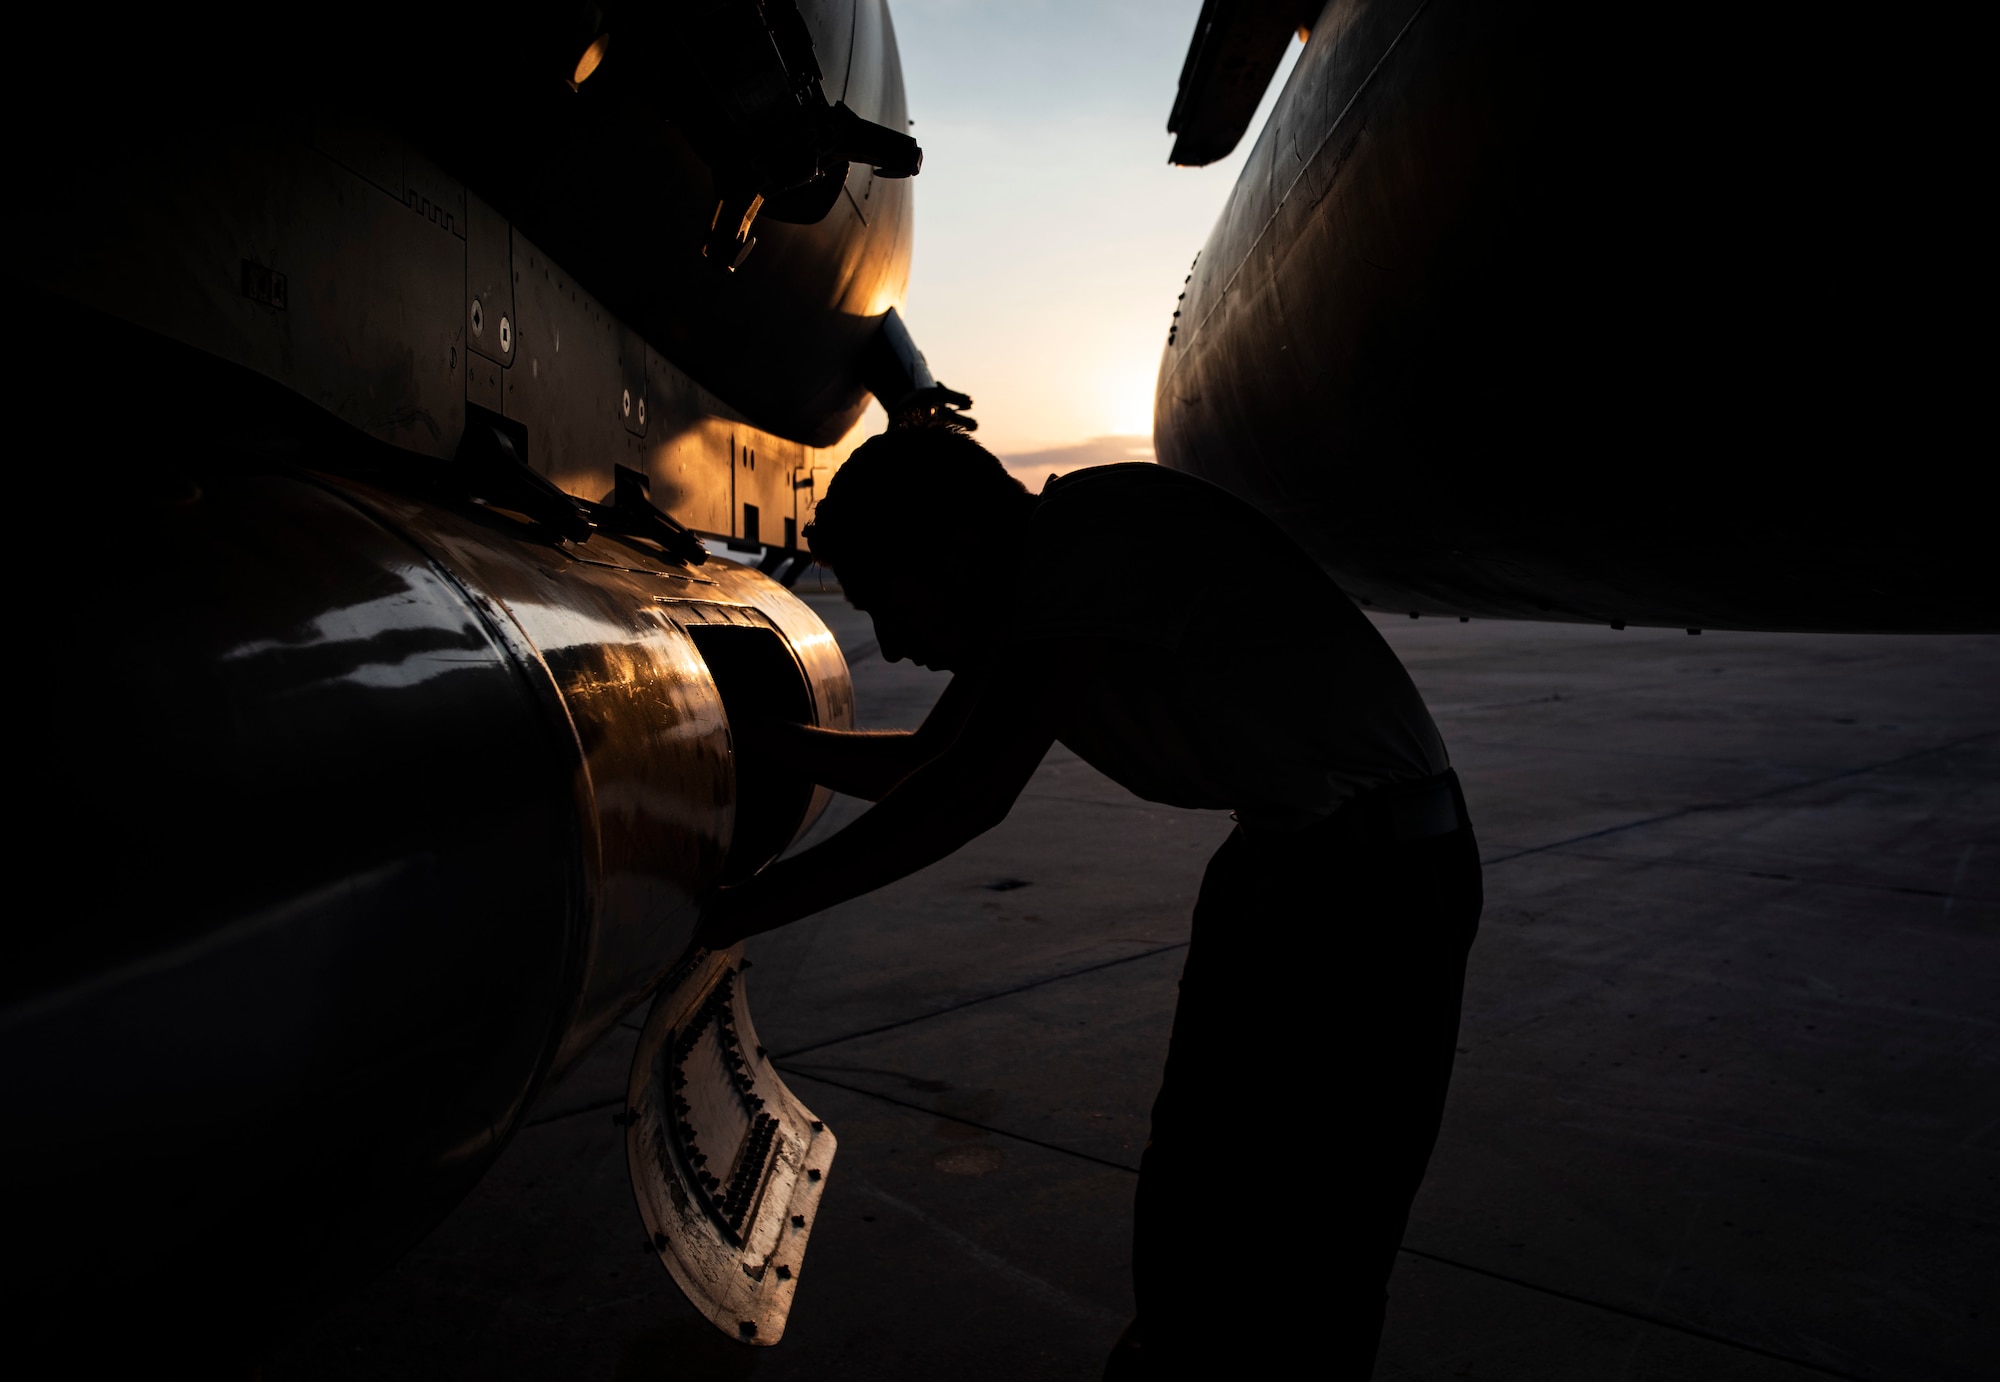 An Airman works on the flight line during sun rise.